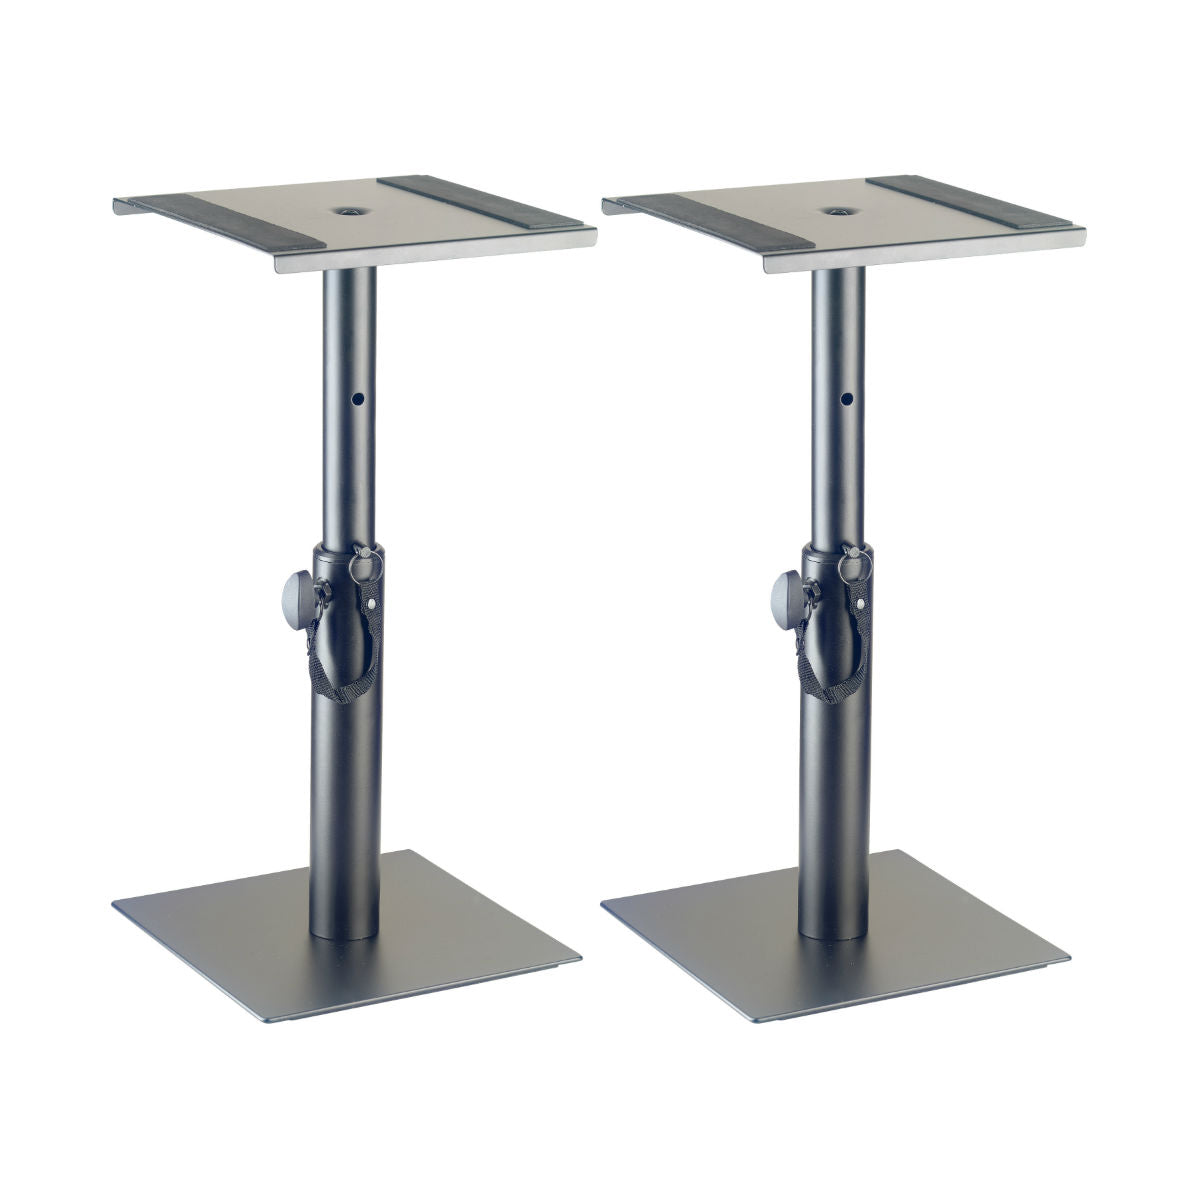 Stagg SMOS-5 Desktop Monitor Stands Pair